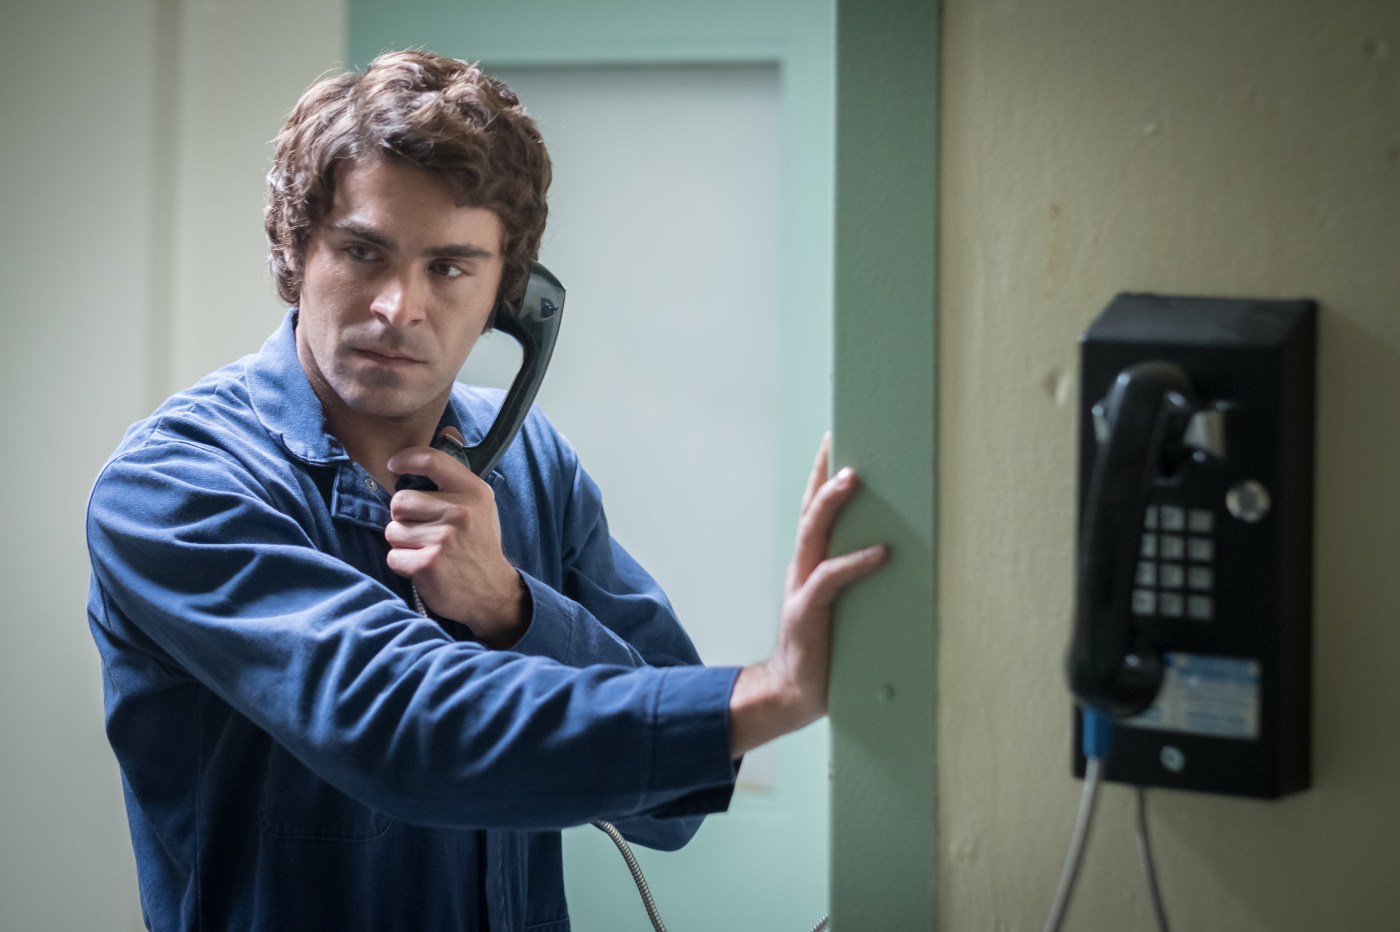 Extremely Wicked, Shockingly Evil and Vile Review: Efron and Collins shine in this Ted Bundy narrative